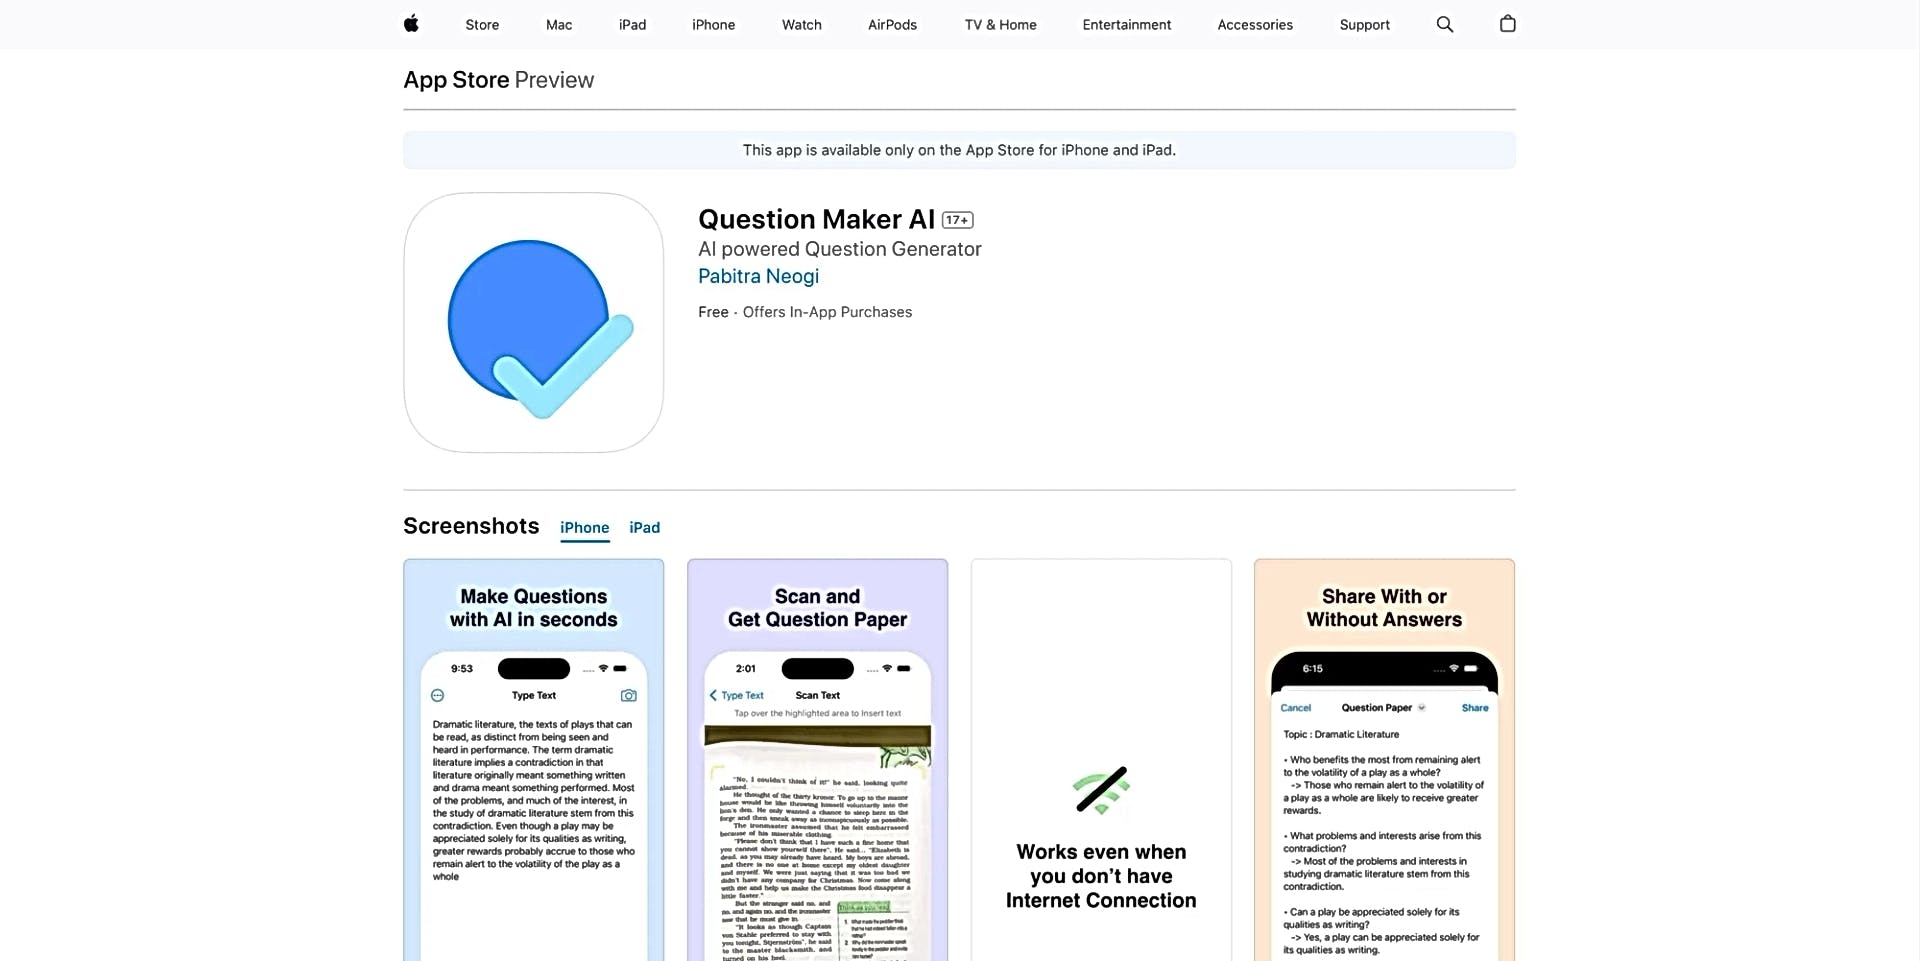 Question Maker AI featured